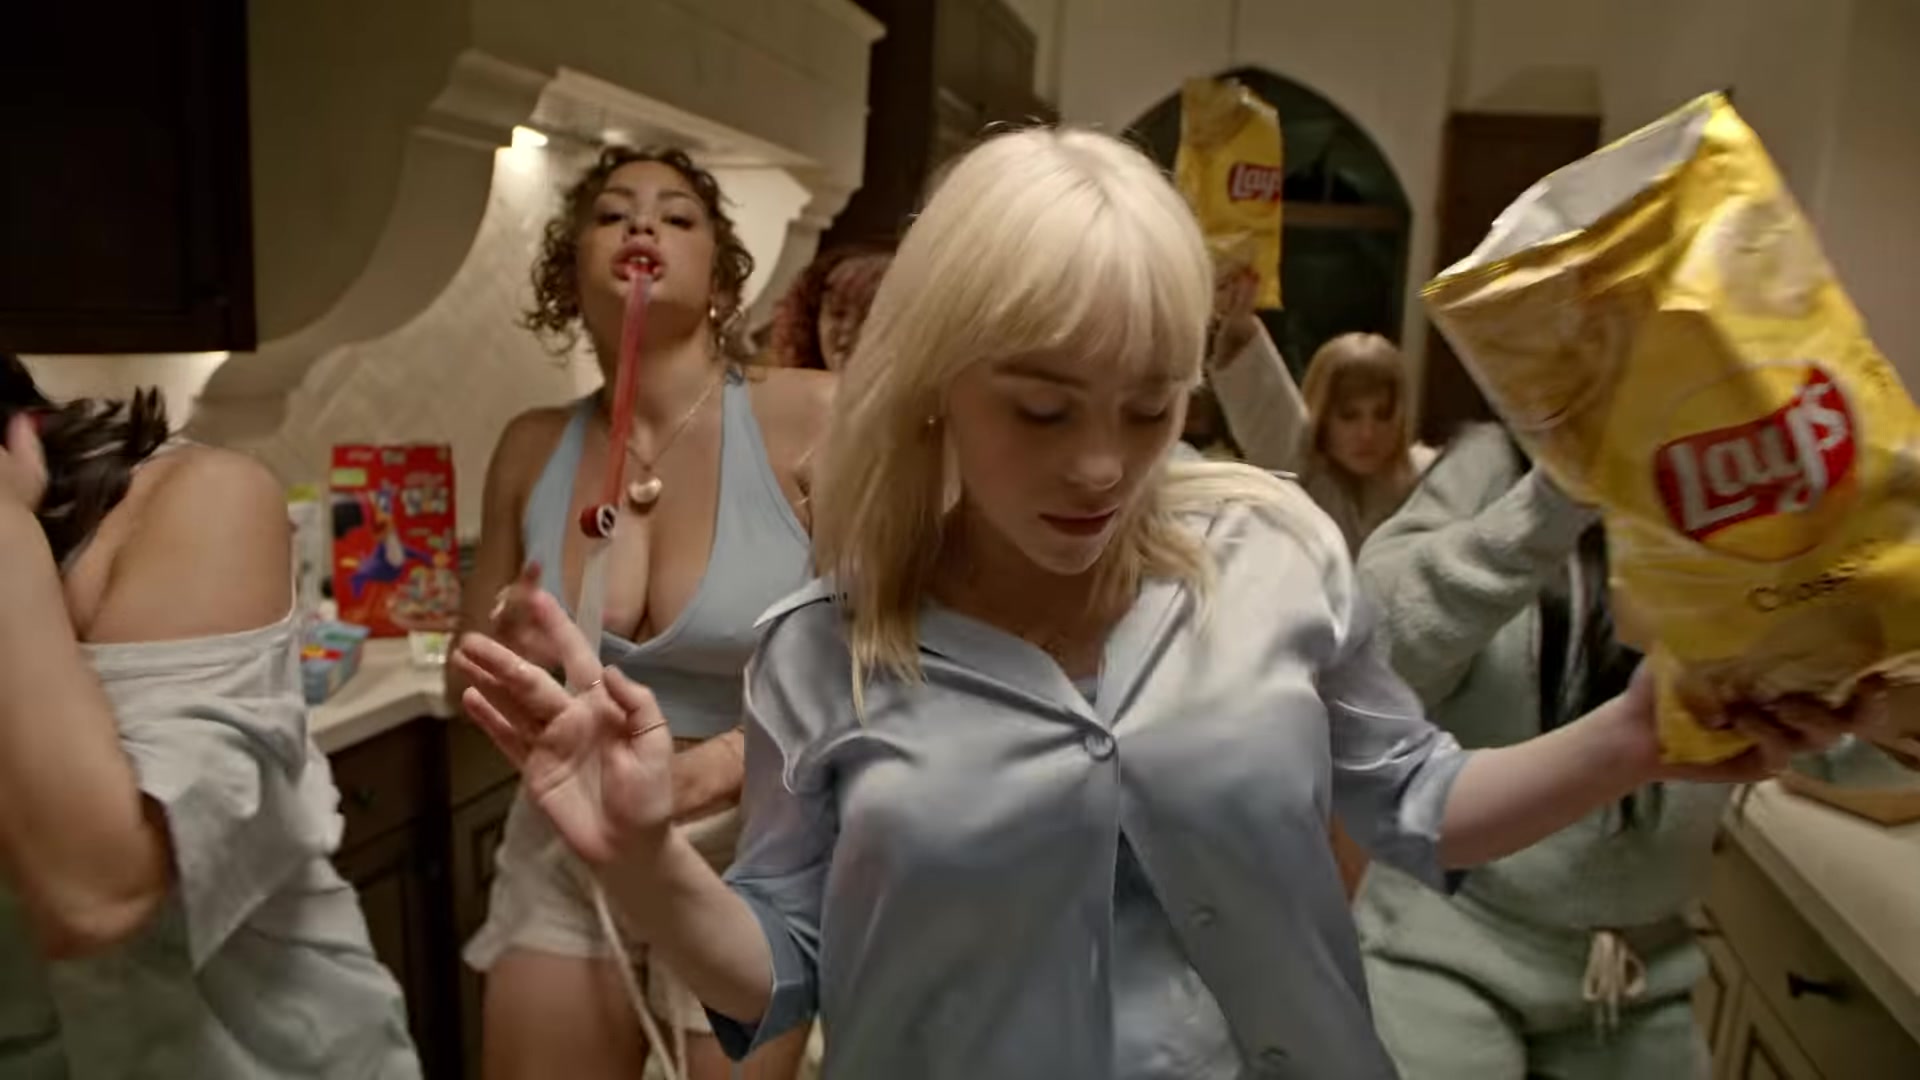 a Music Video and product placement was spotted: Lay’s Classic Potato Chips...